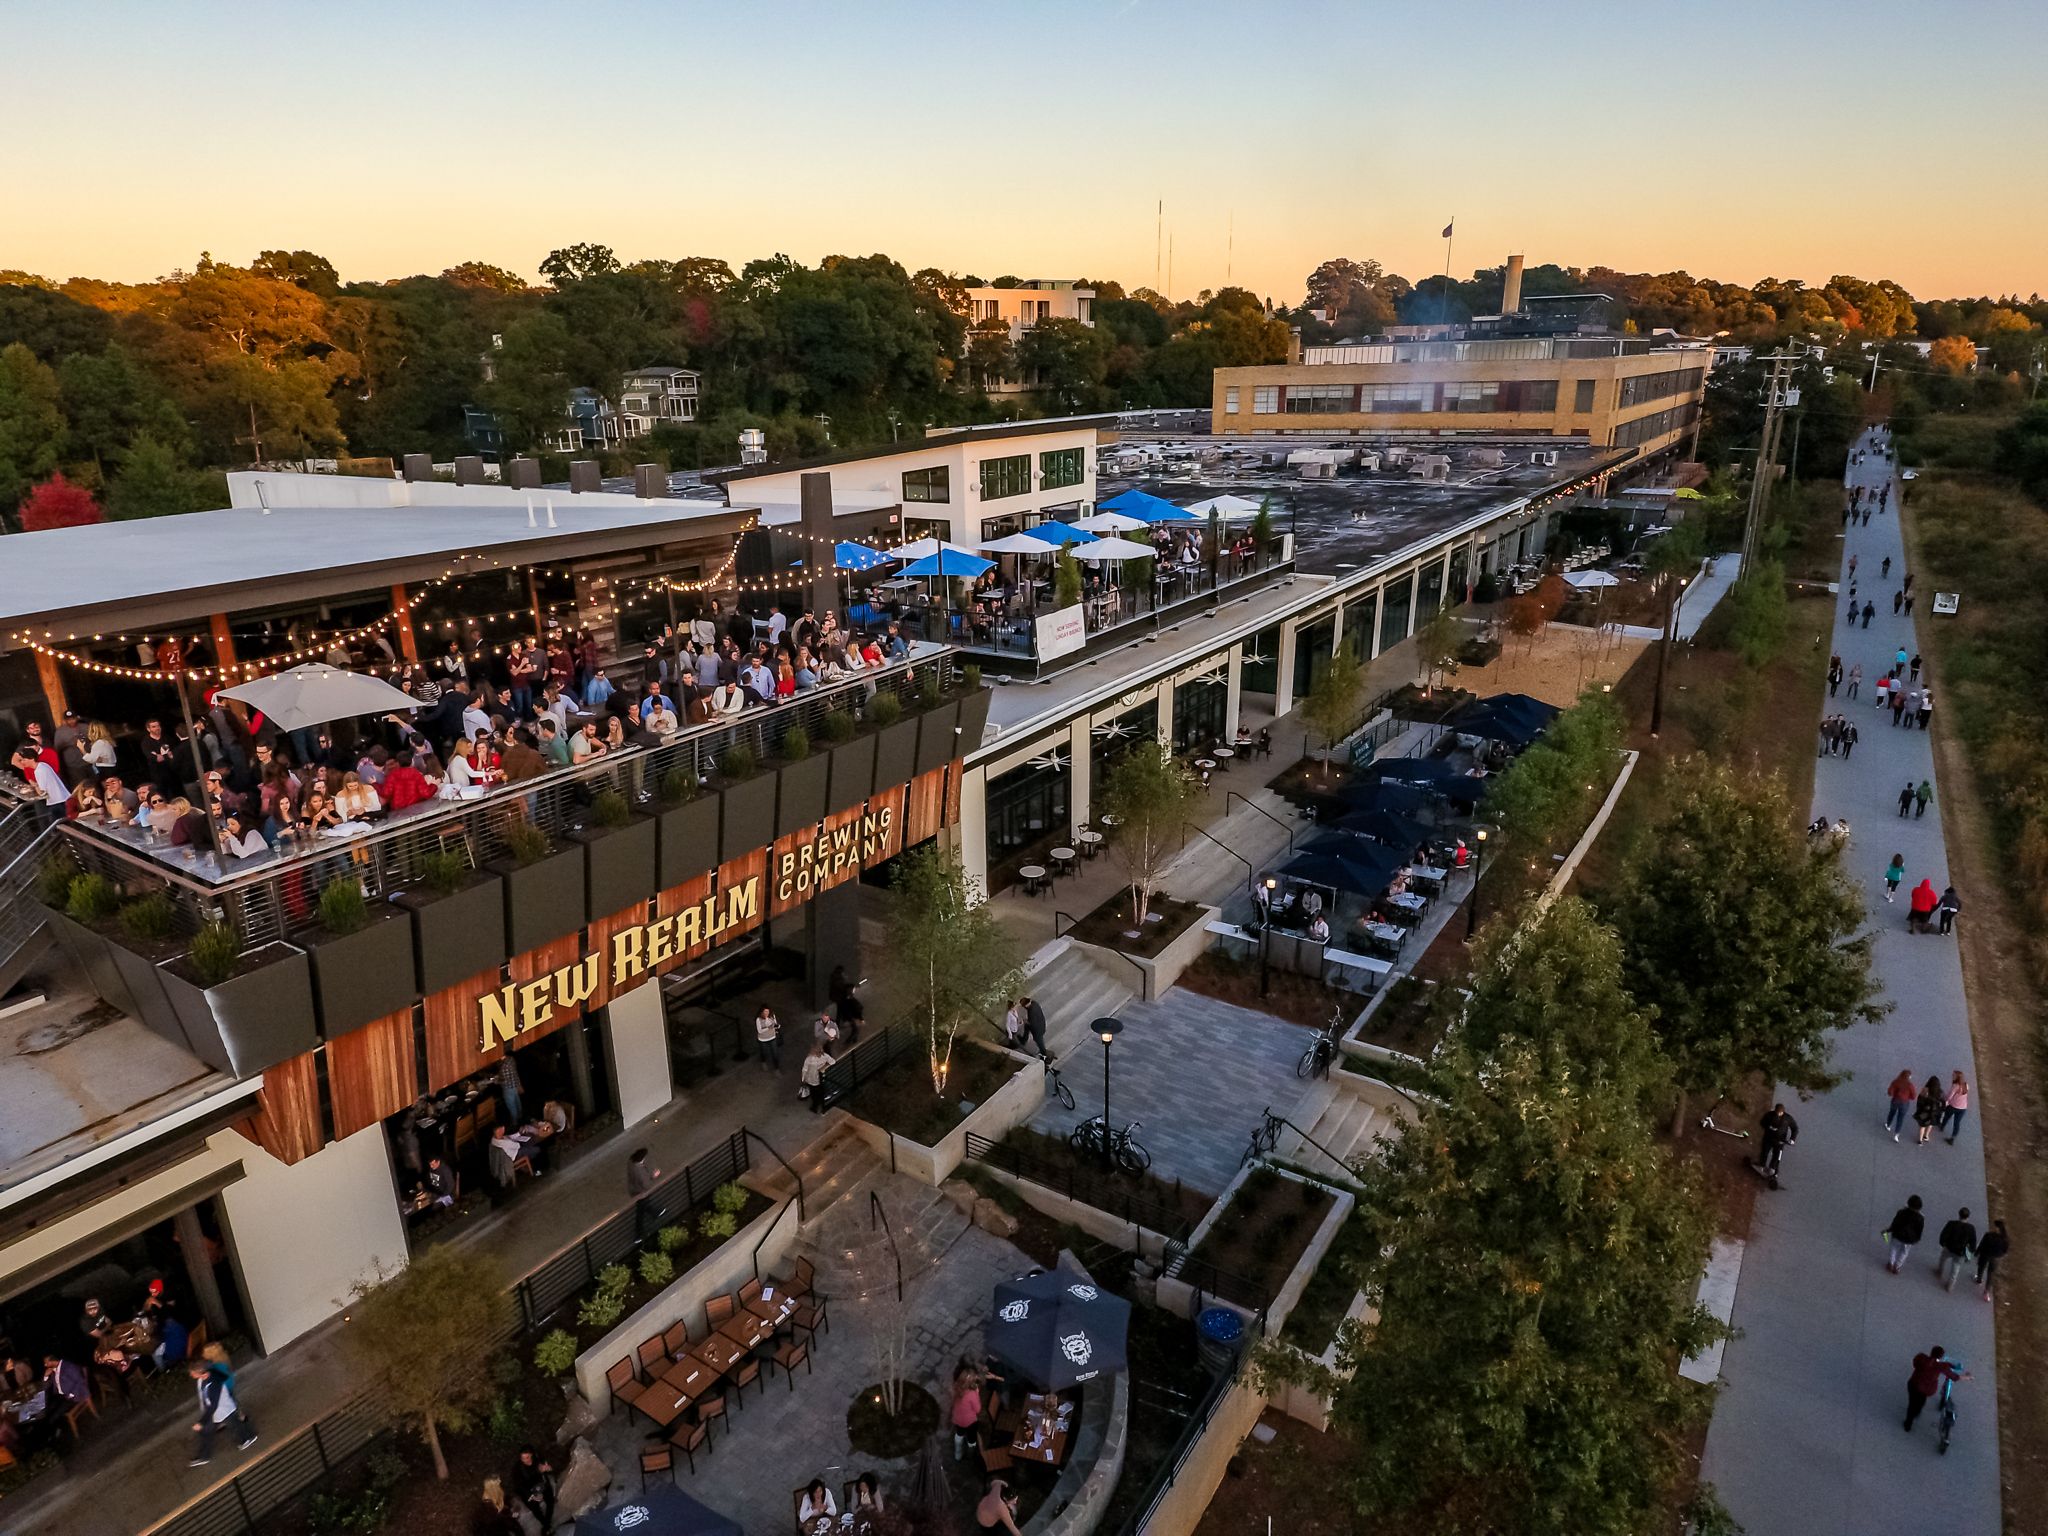 New Realm Brewing's rooftop is full of people and a sidewalk, the Beltline, shows pedestrians walking in both directions. The sun is fading from blue to orange.